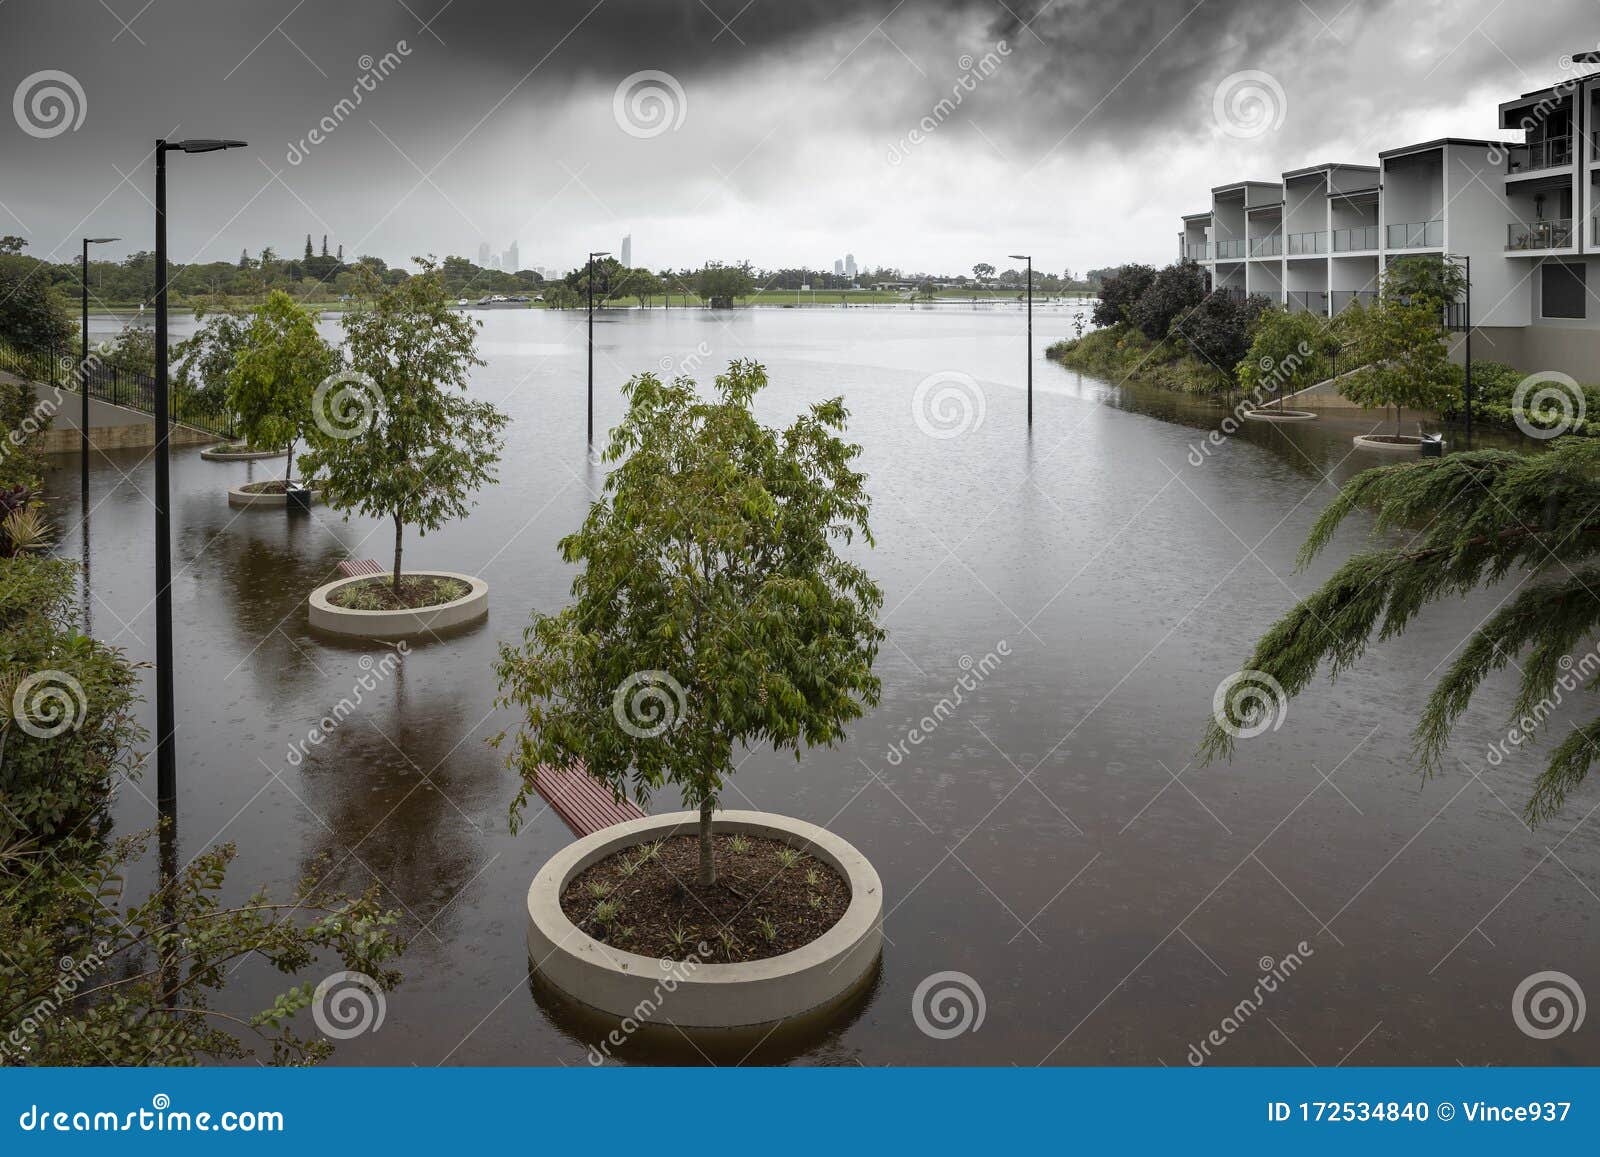 flooding caused from constant rain on the gold coast, queensland, australia